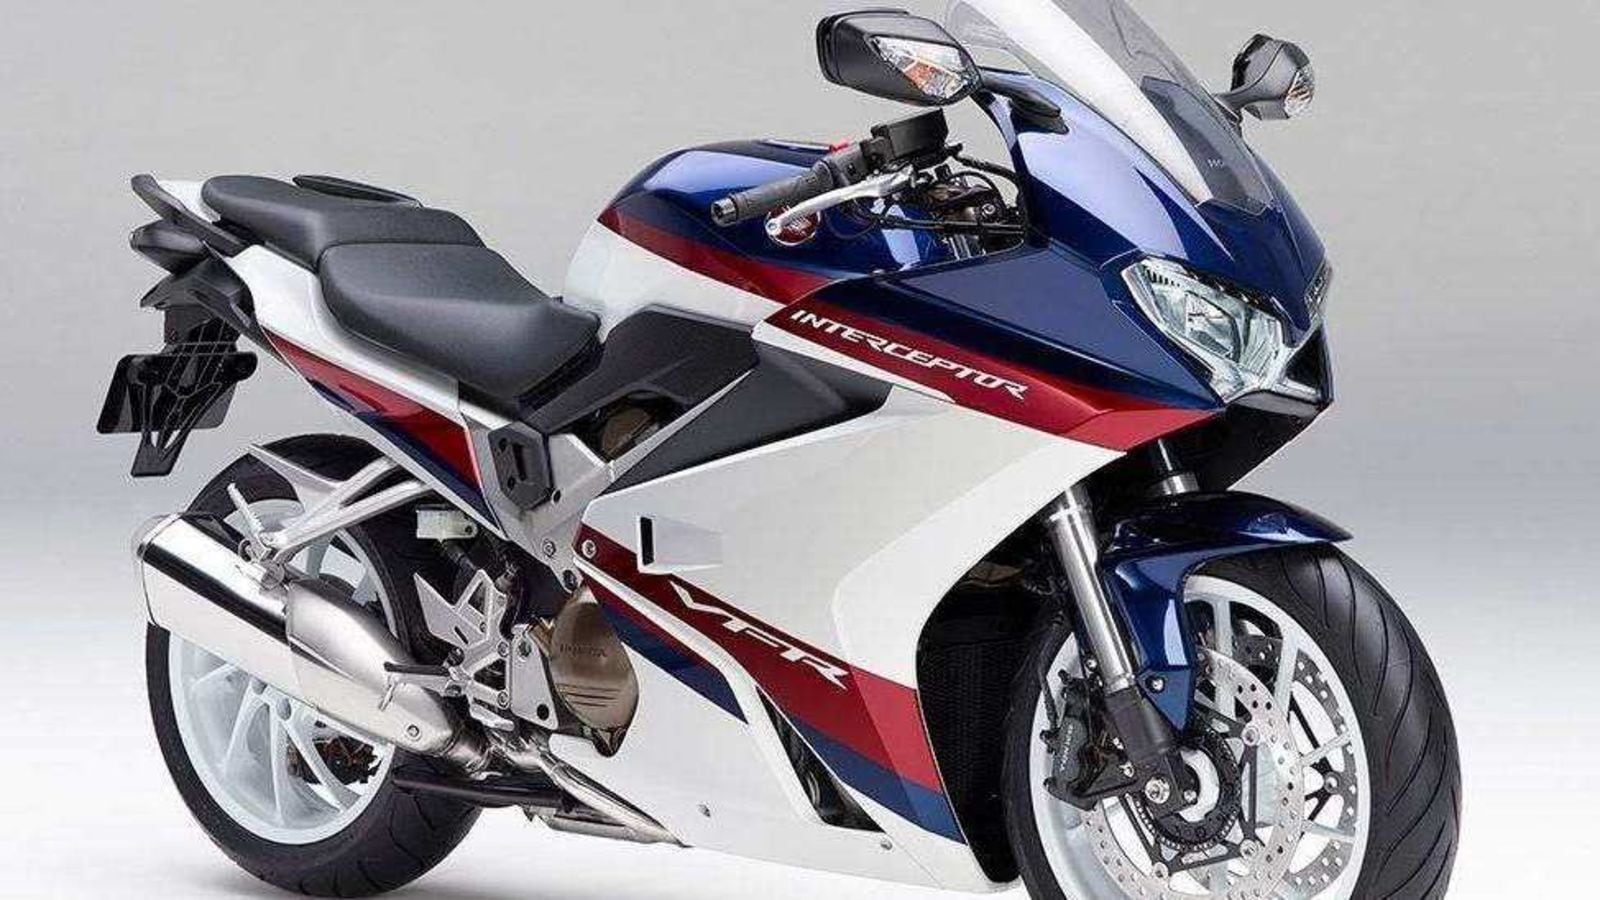 Honda’s new V4 sports bike expected to land in 2023 HT Auto